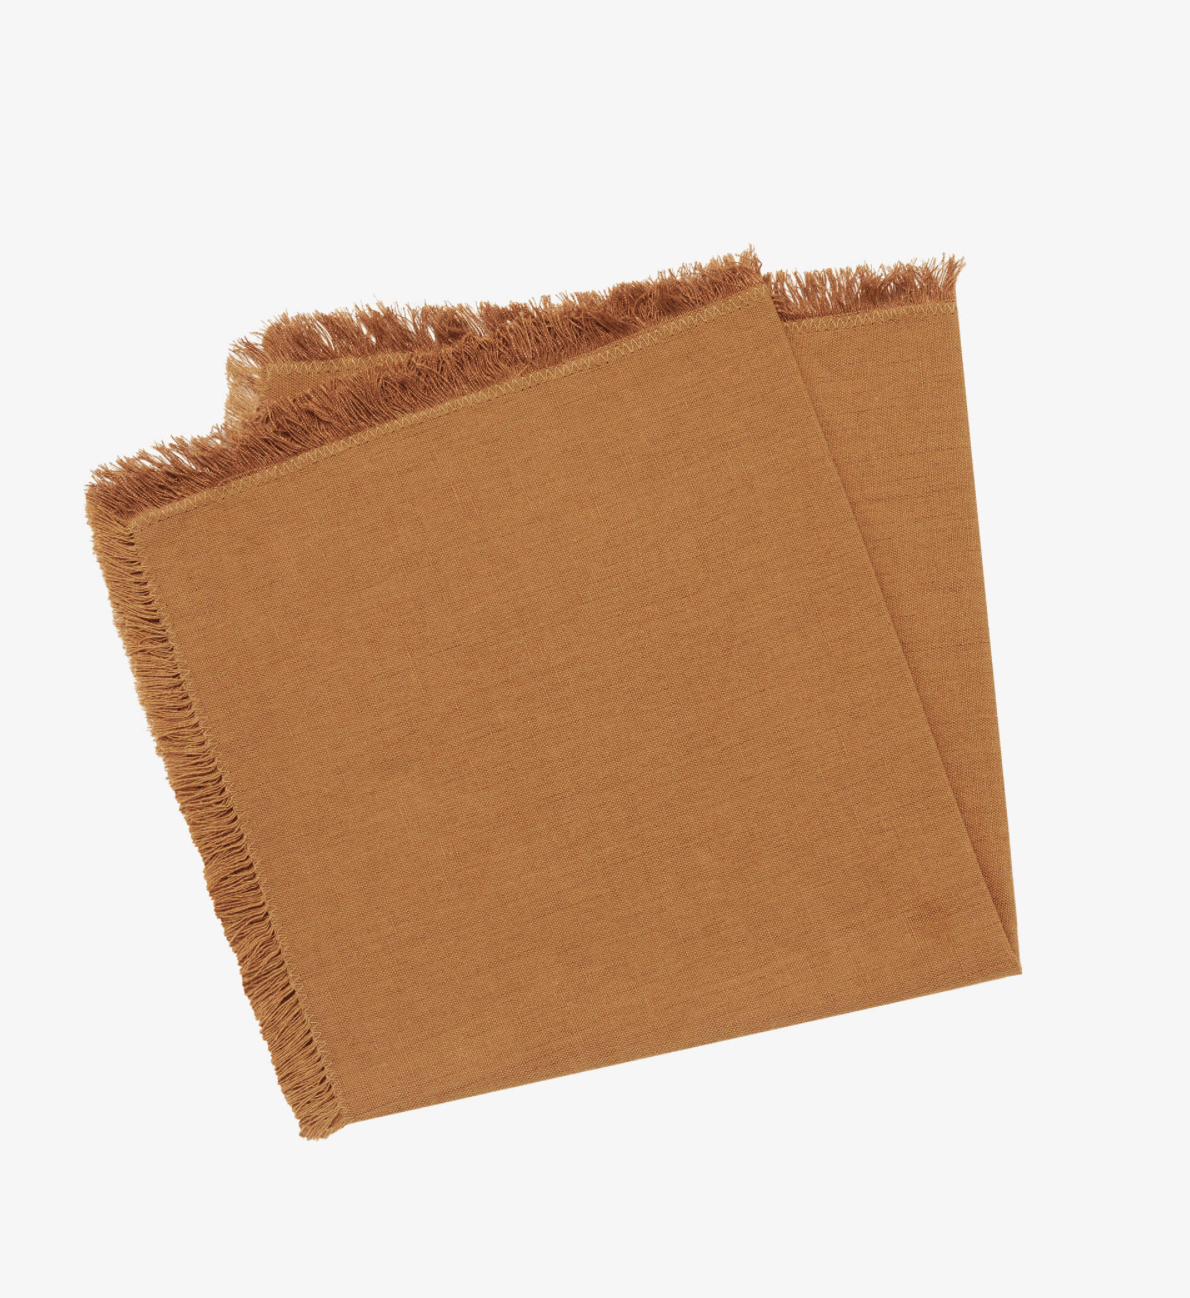 Otto Napkin Set of 4 - Turmeric House of Dudley